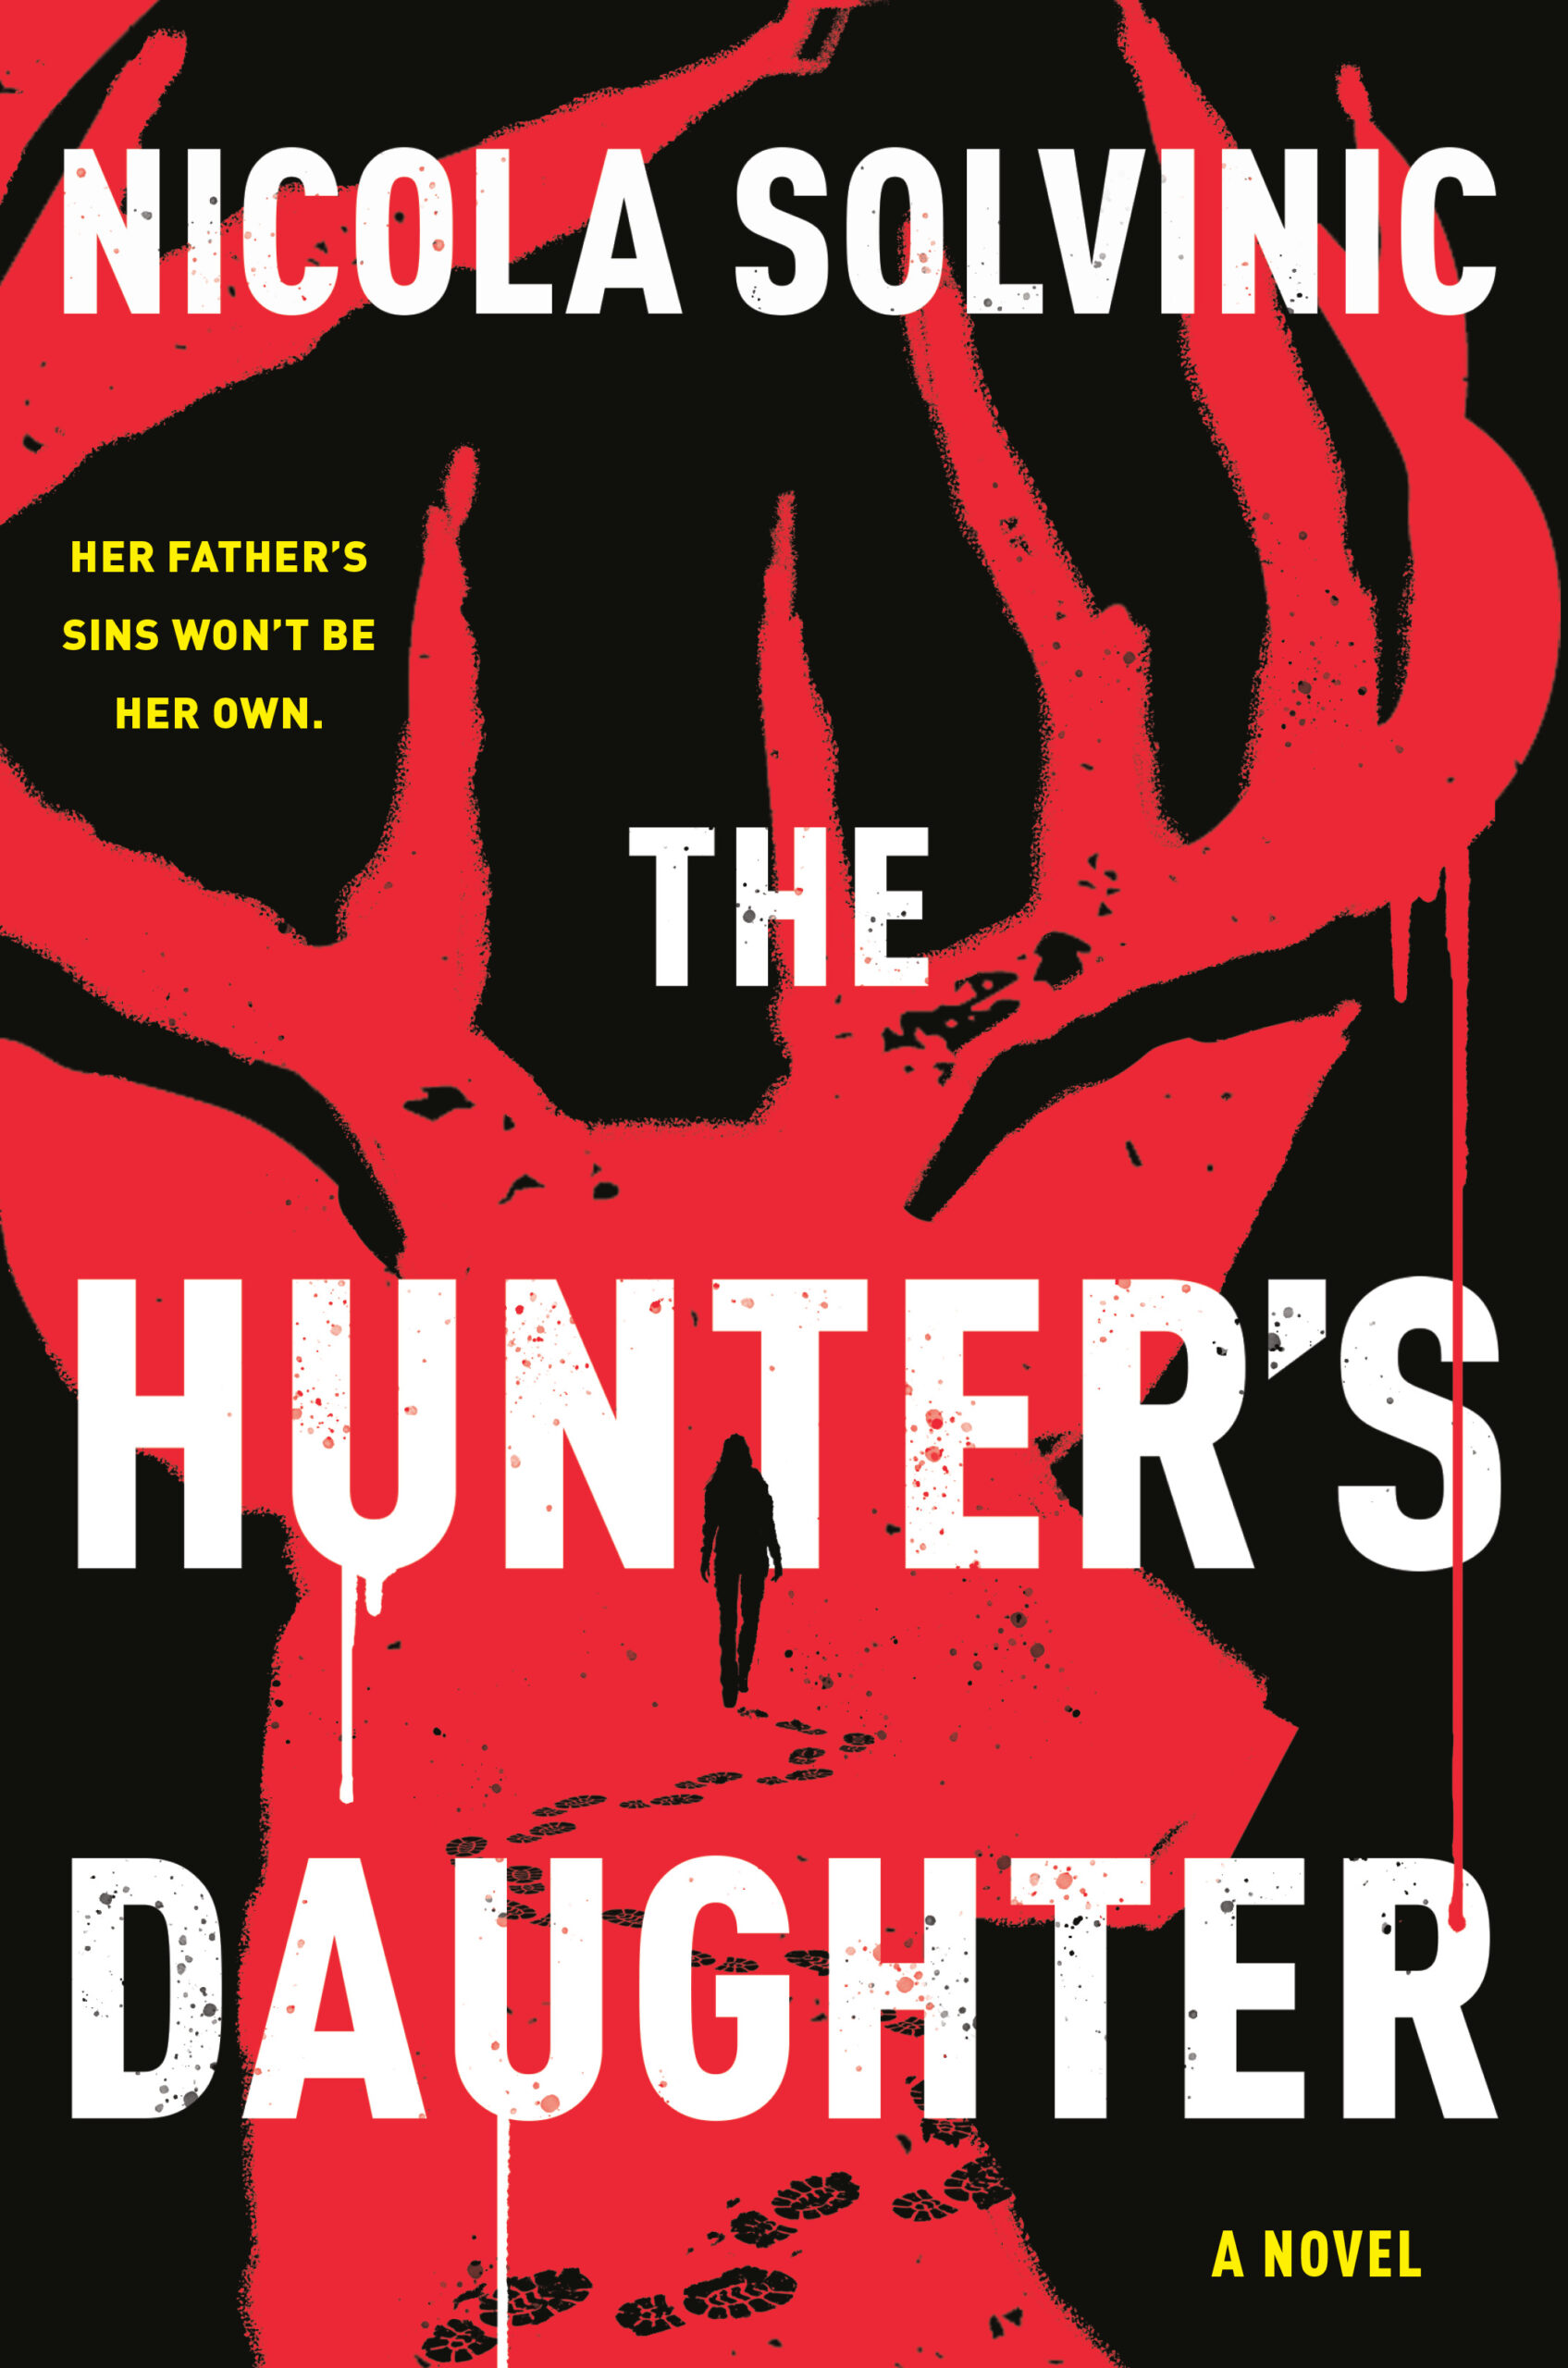 THE HUNTER’S DAUGHTER